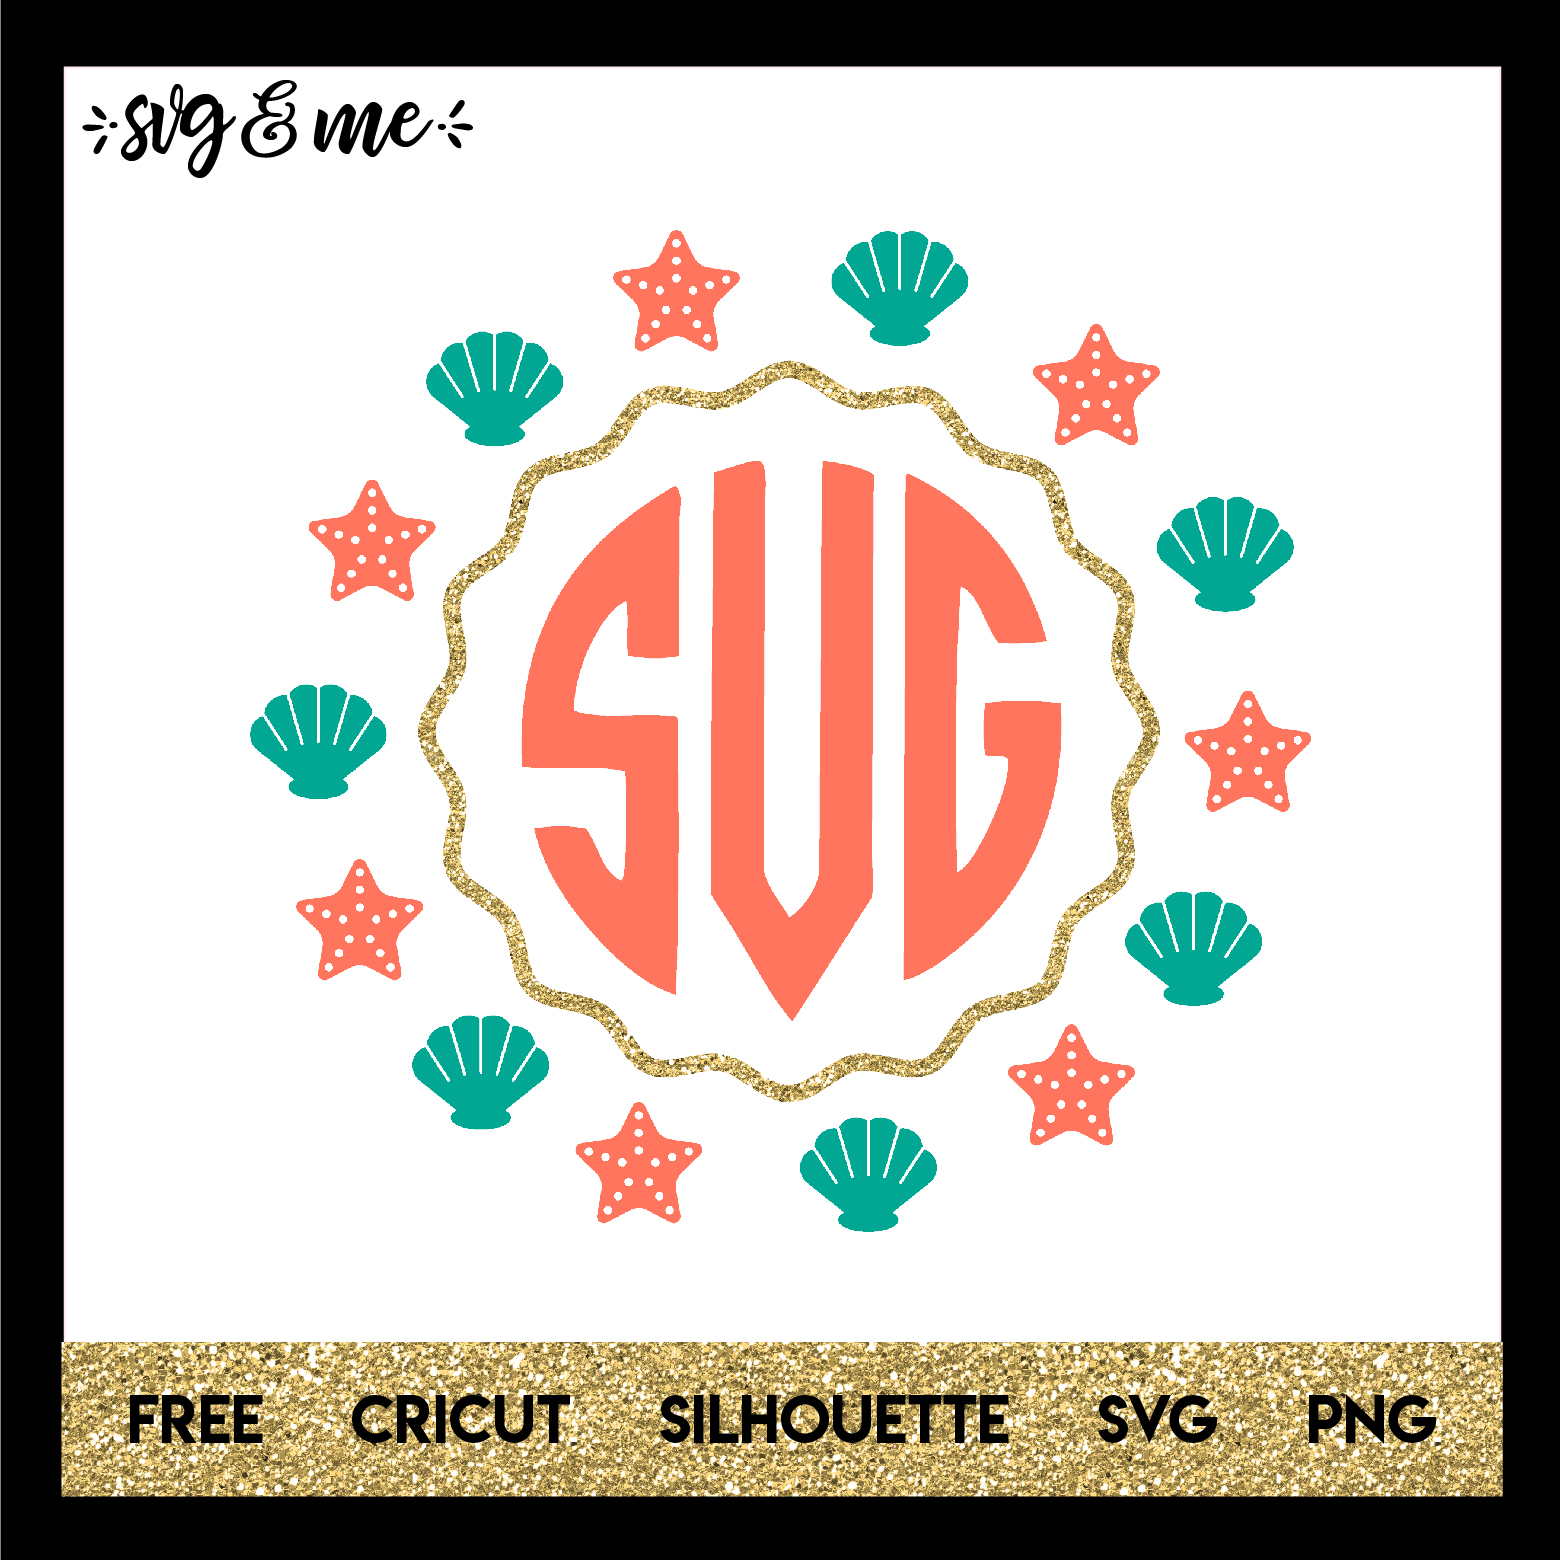 FREE SVG CUT FILE for Cricut, Silhouette and more - Mermaid Frame SVG